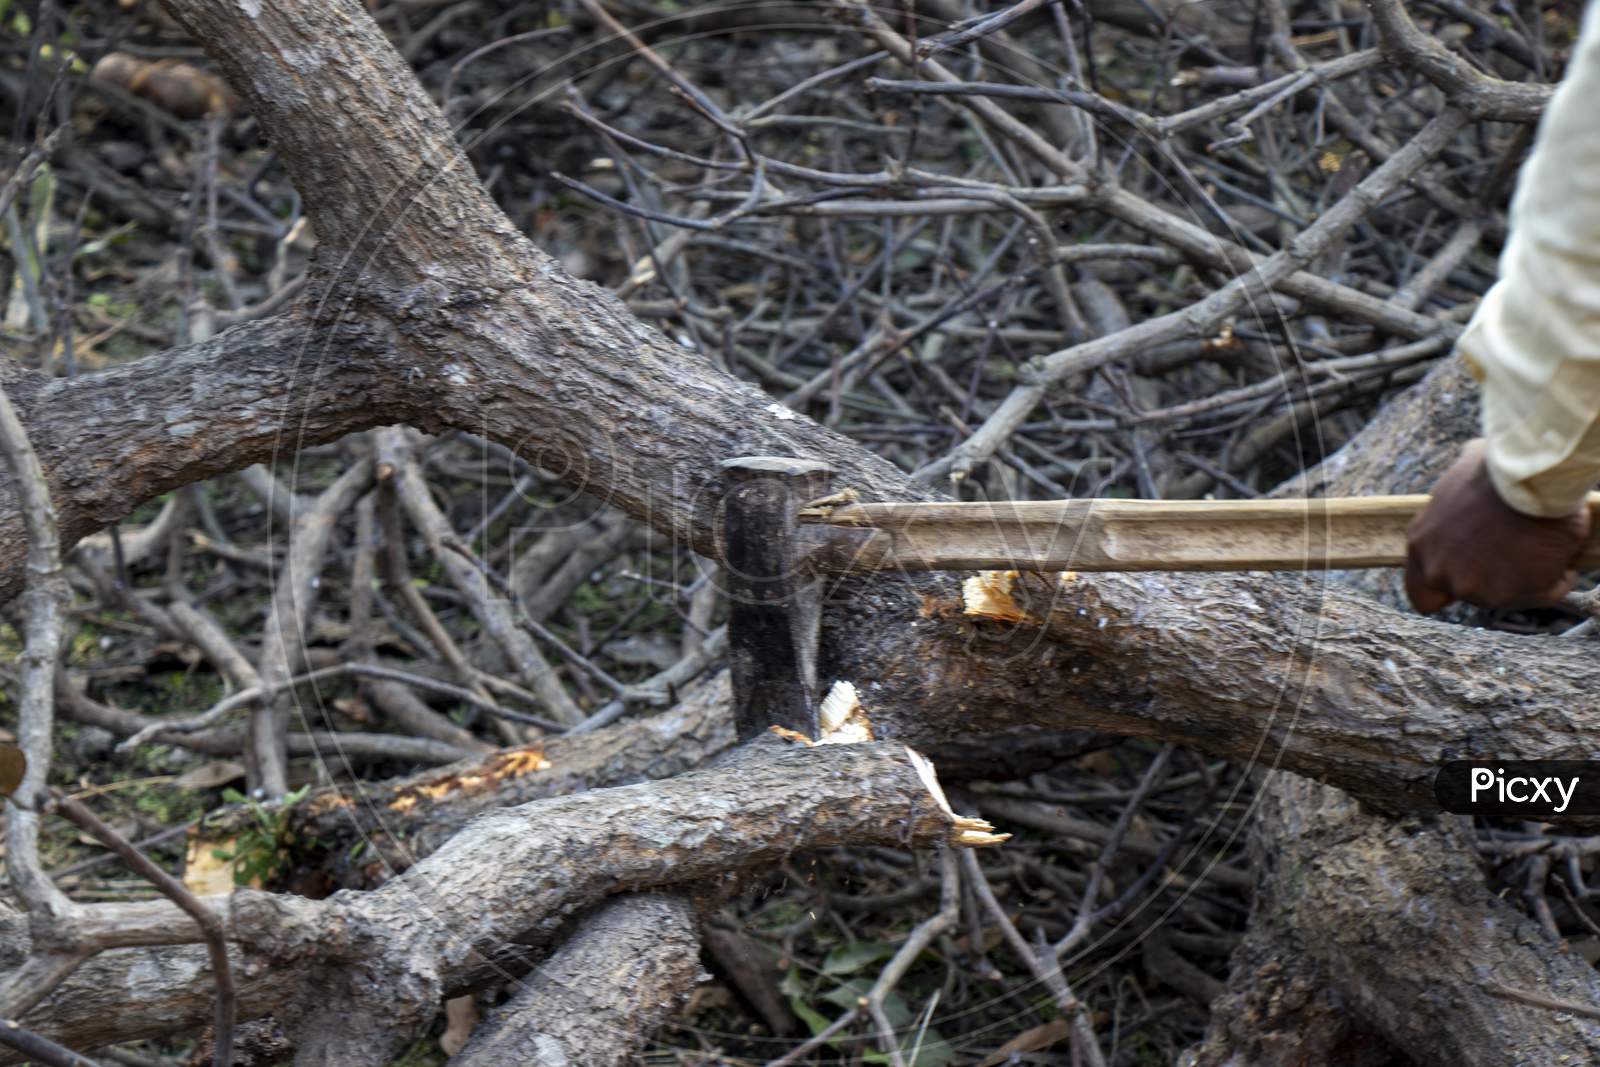 Close-Up Of Woodcutter Axe In Motion, Bring Down Trees Concept